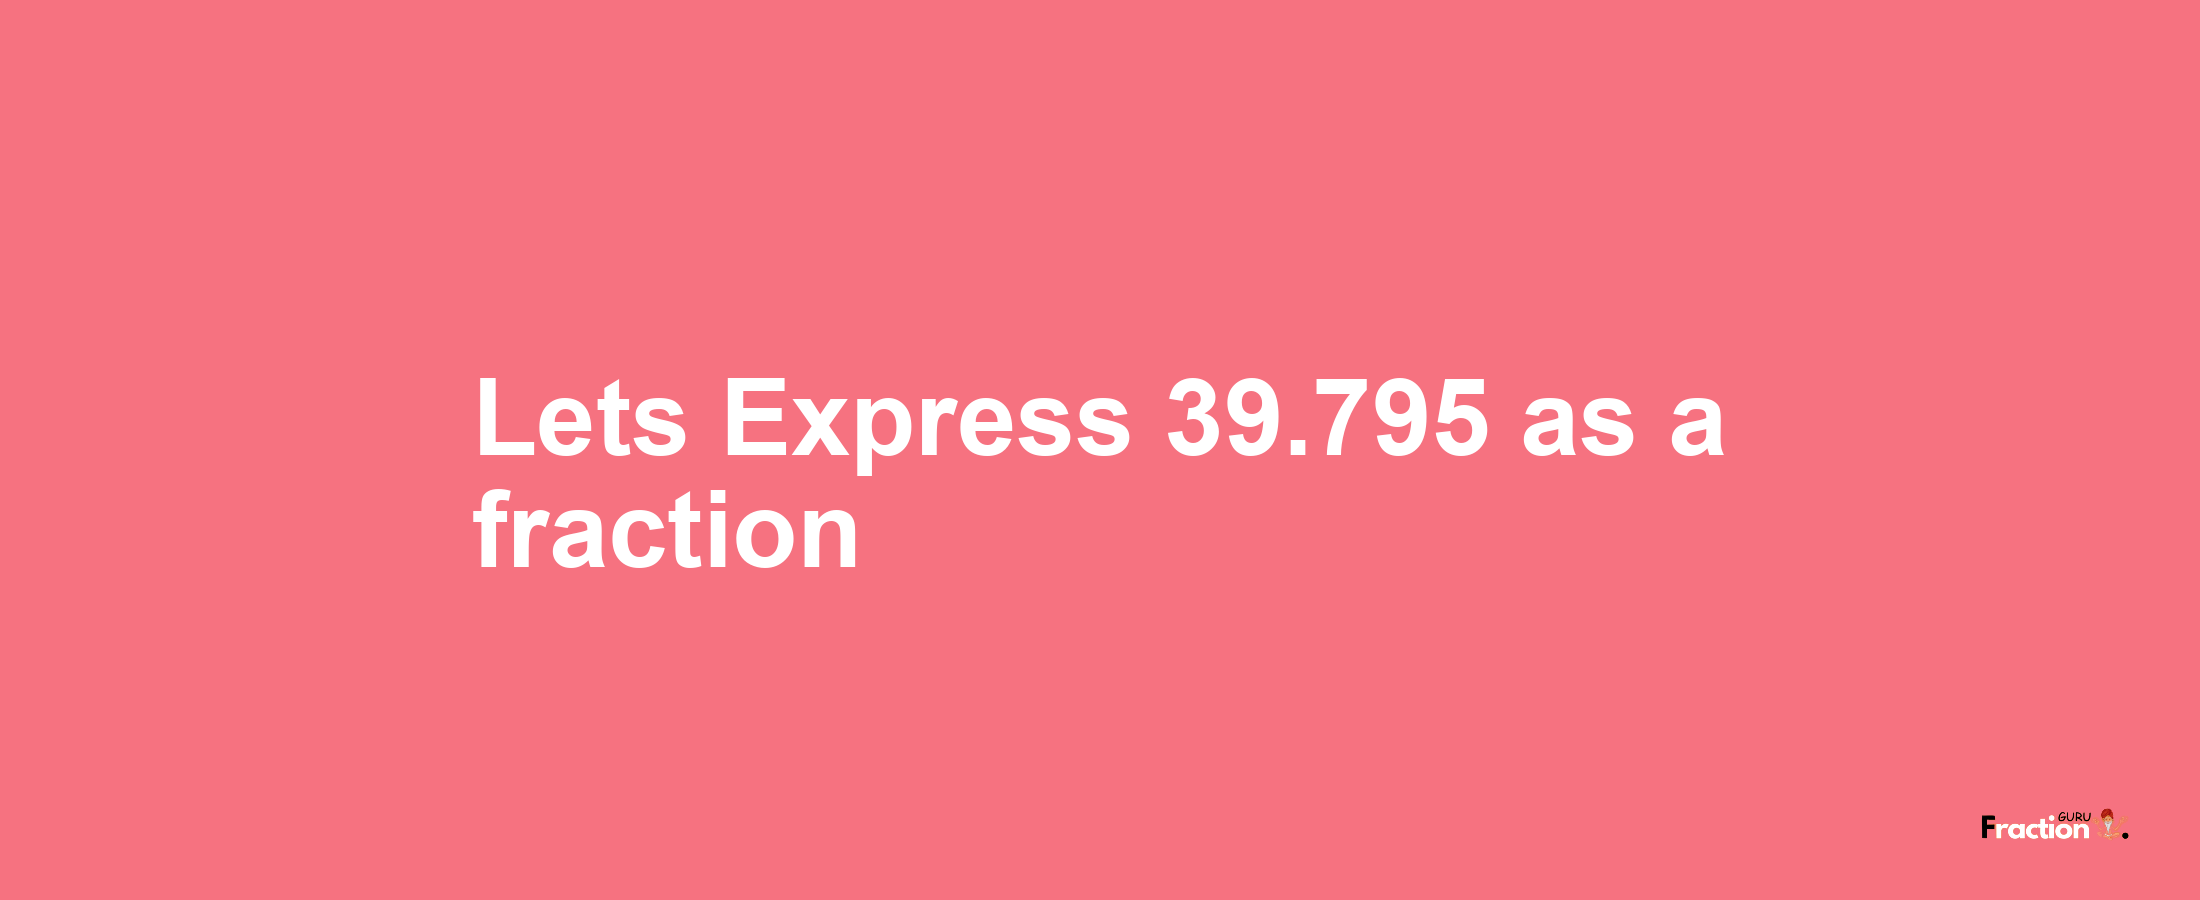 Lets Express 39.795 as afraction